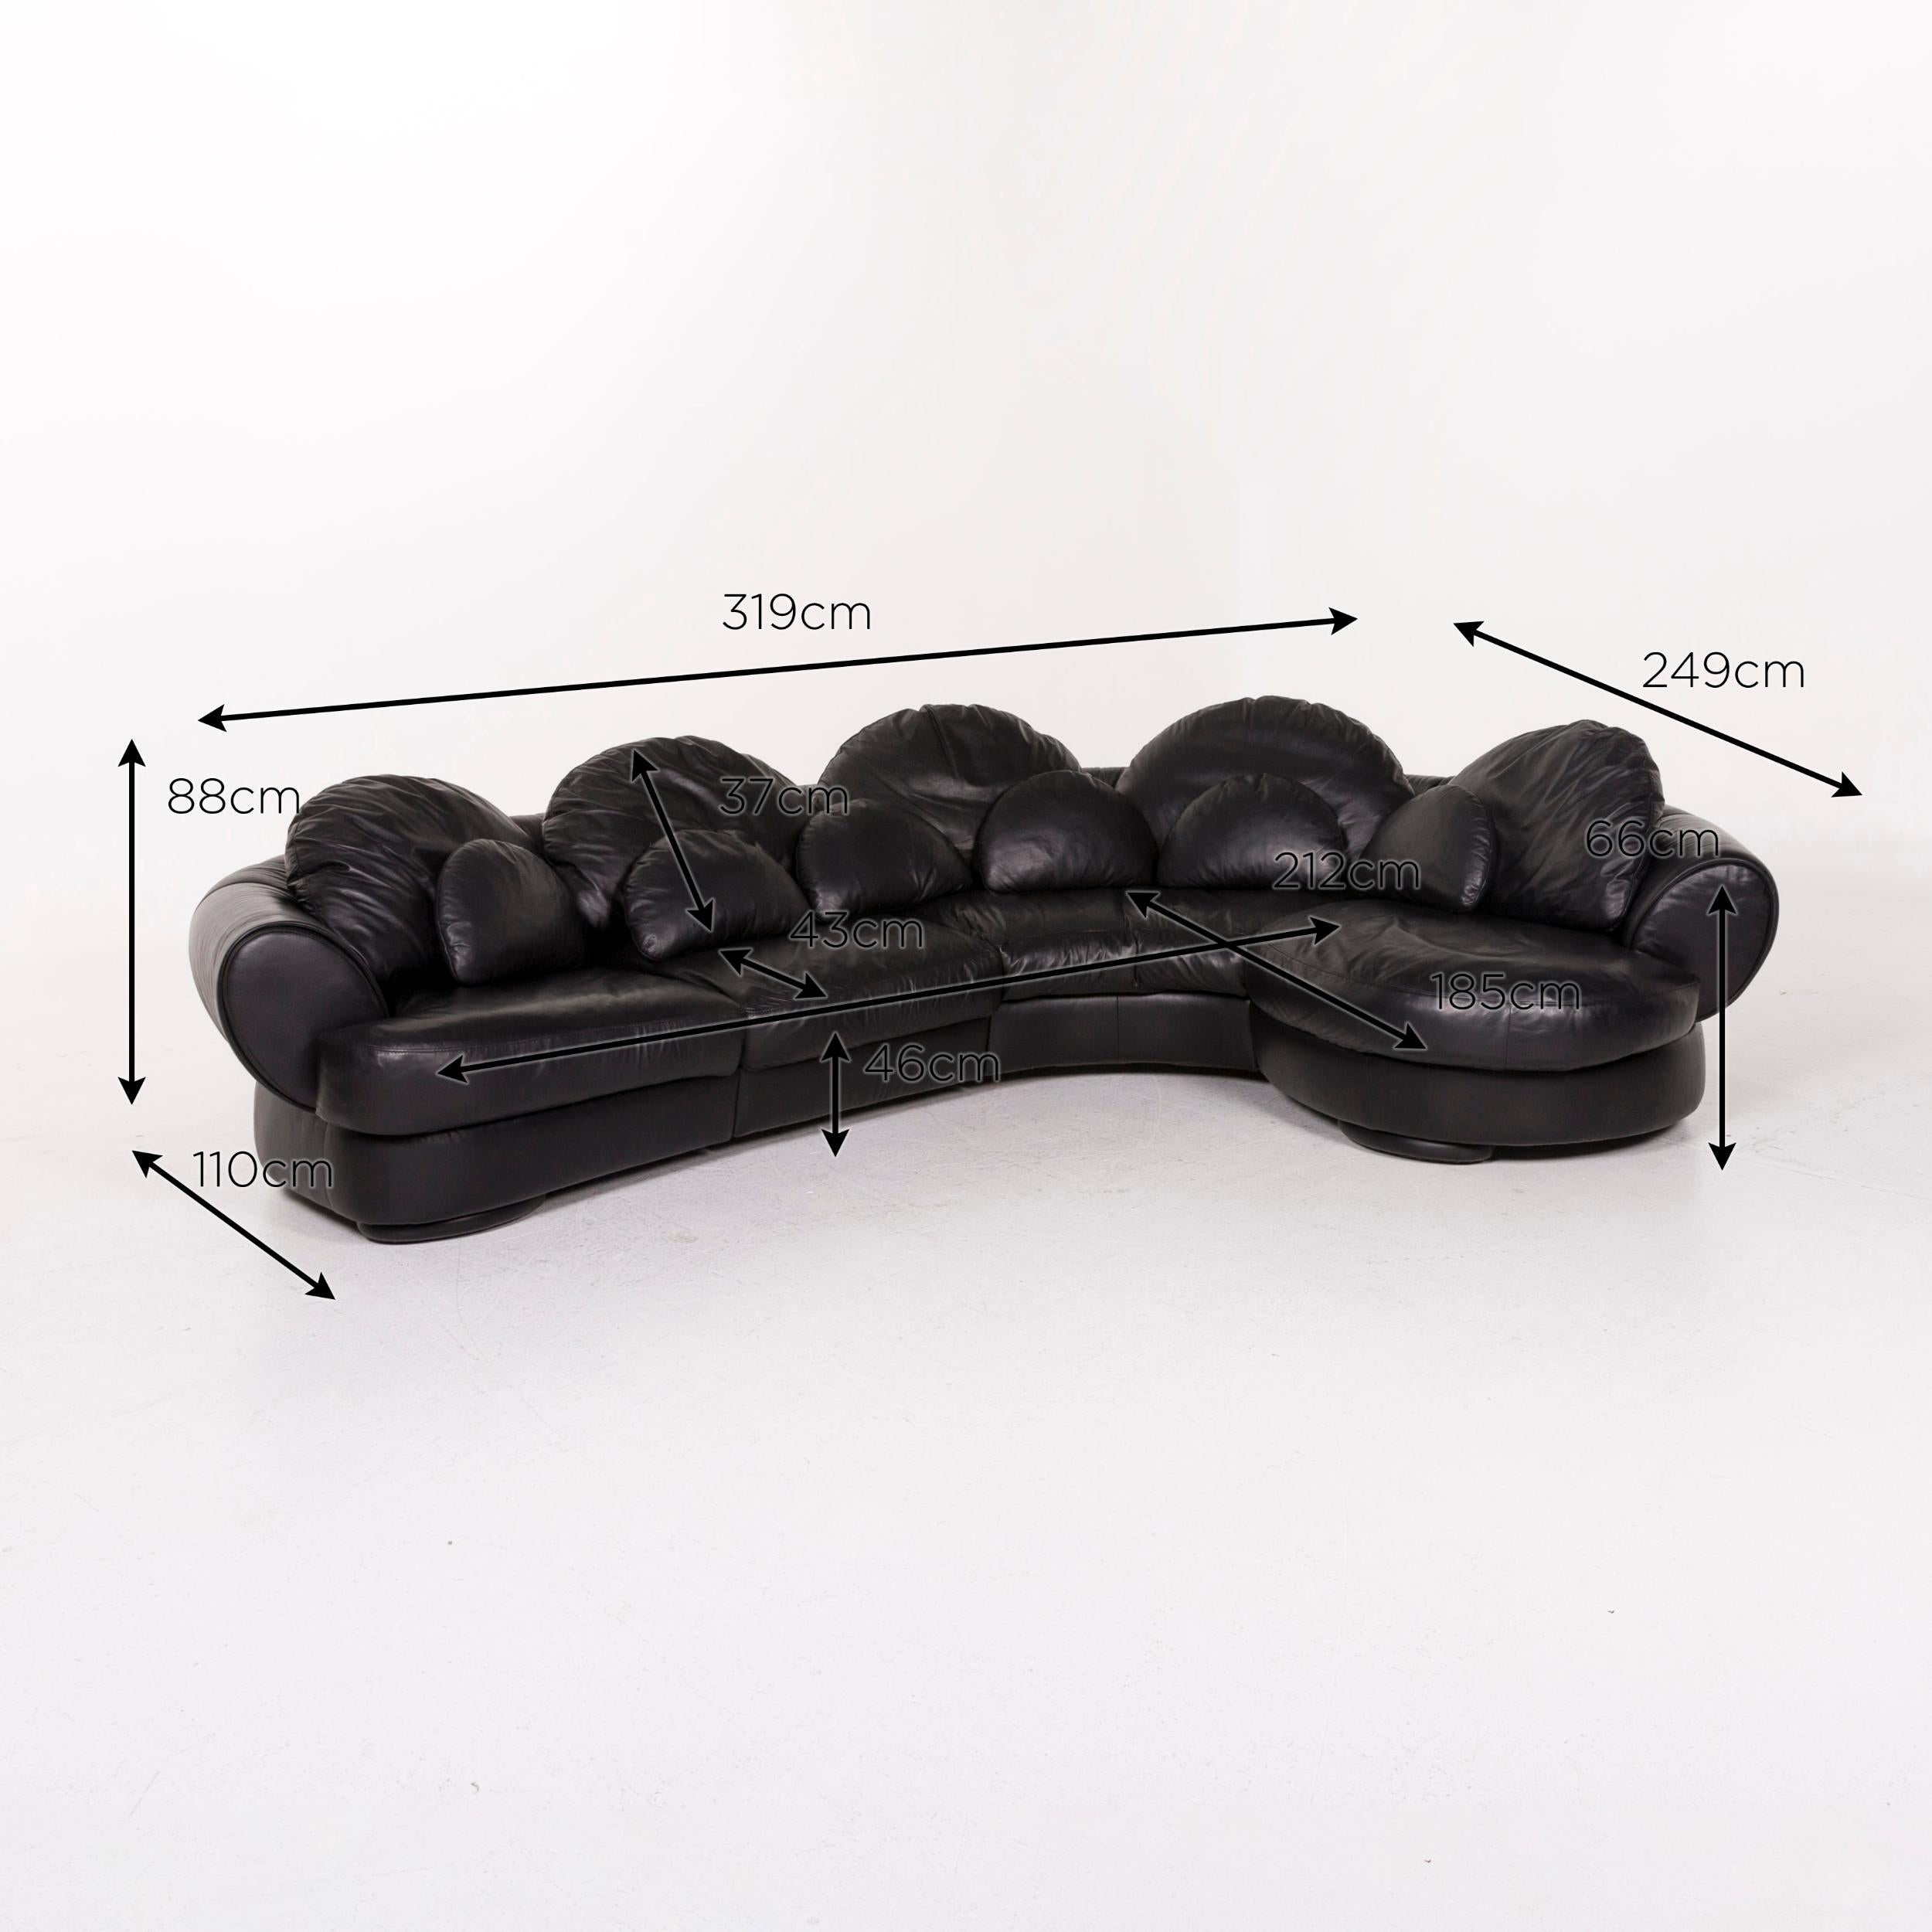 We bring to you a Natuzzi leather sofa set black 1x corner sofa 1x stool.
 SKU: #12334
 

 Product Measurements in centimeters:
 

 depth: 110
 width: 319
 height: 88
 seat-height: 46
 rest-height: 66
 seat-depth: 43
 seat-width: 212
